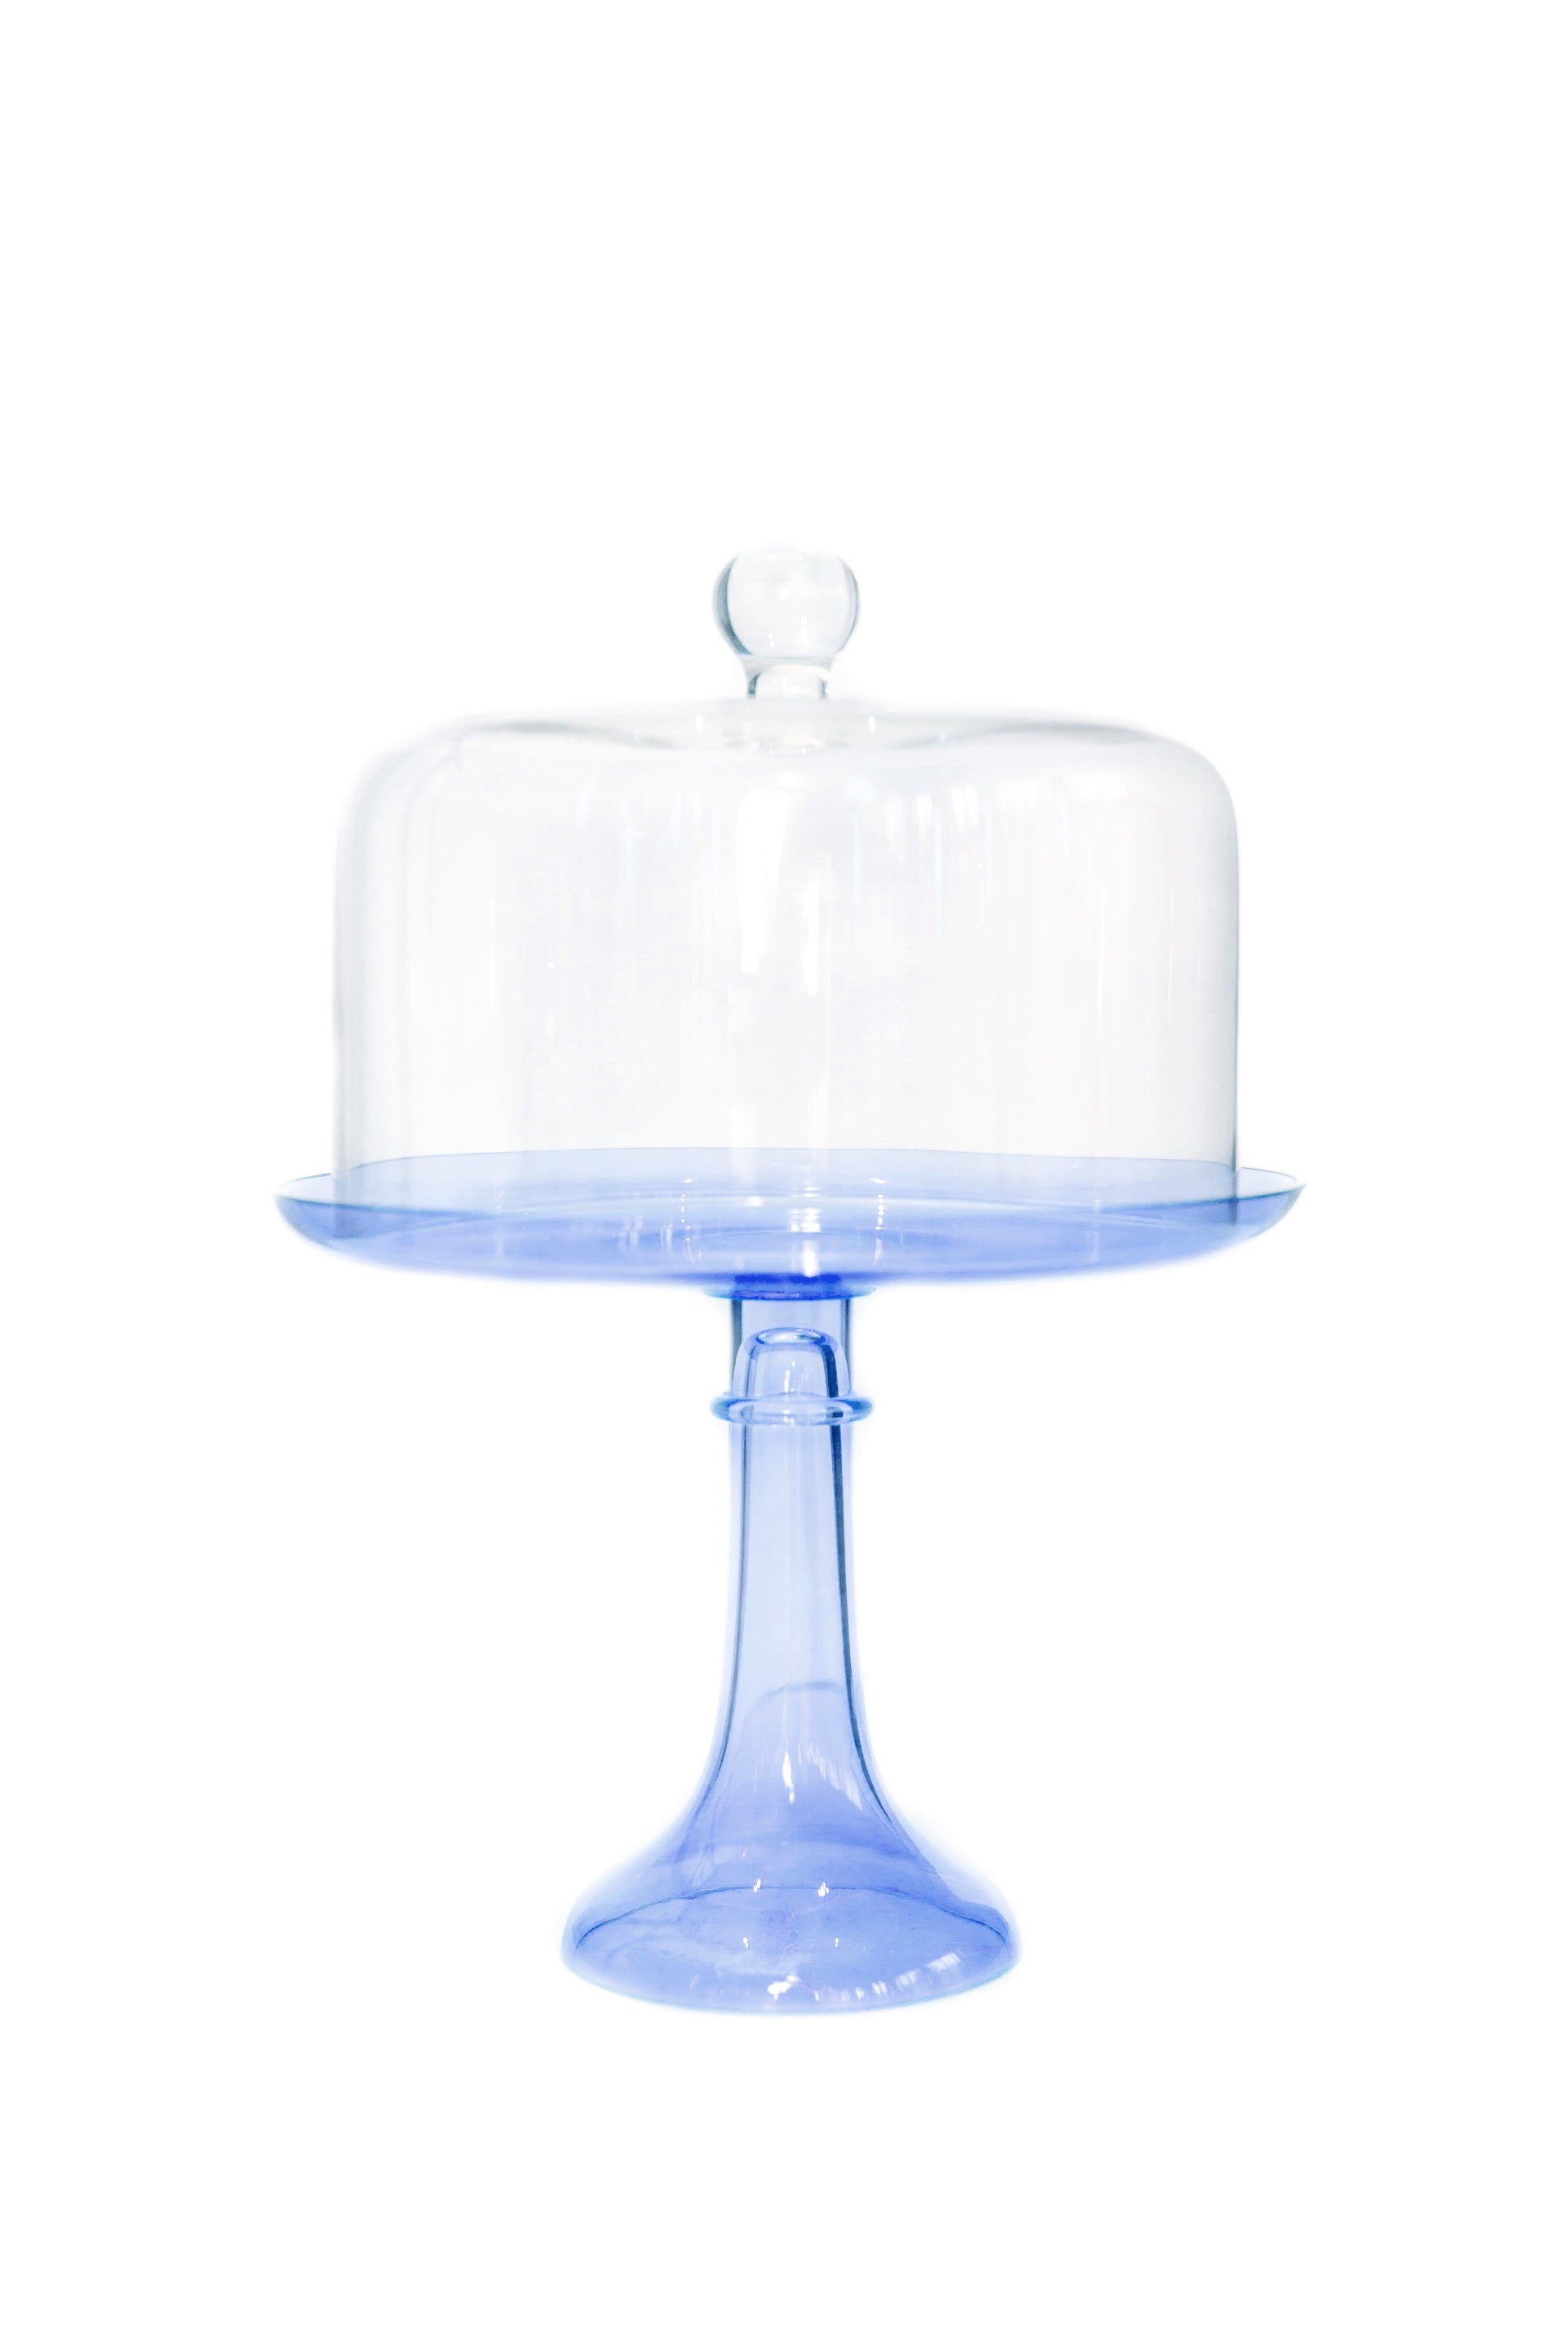 Vintage Blue Cake Stand - Inspired by Alma Party Decorations Bristol